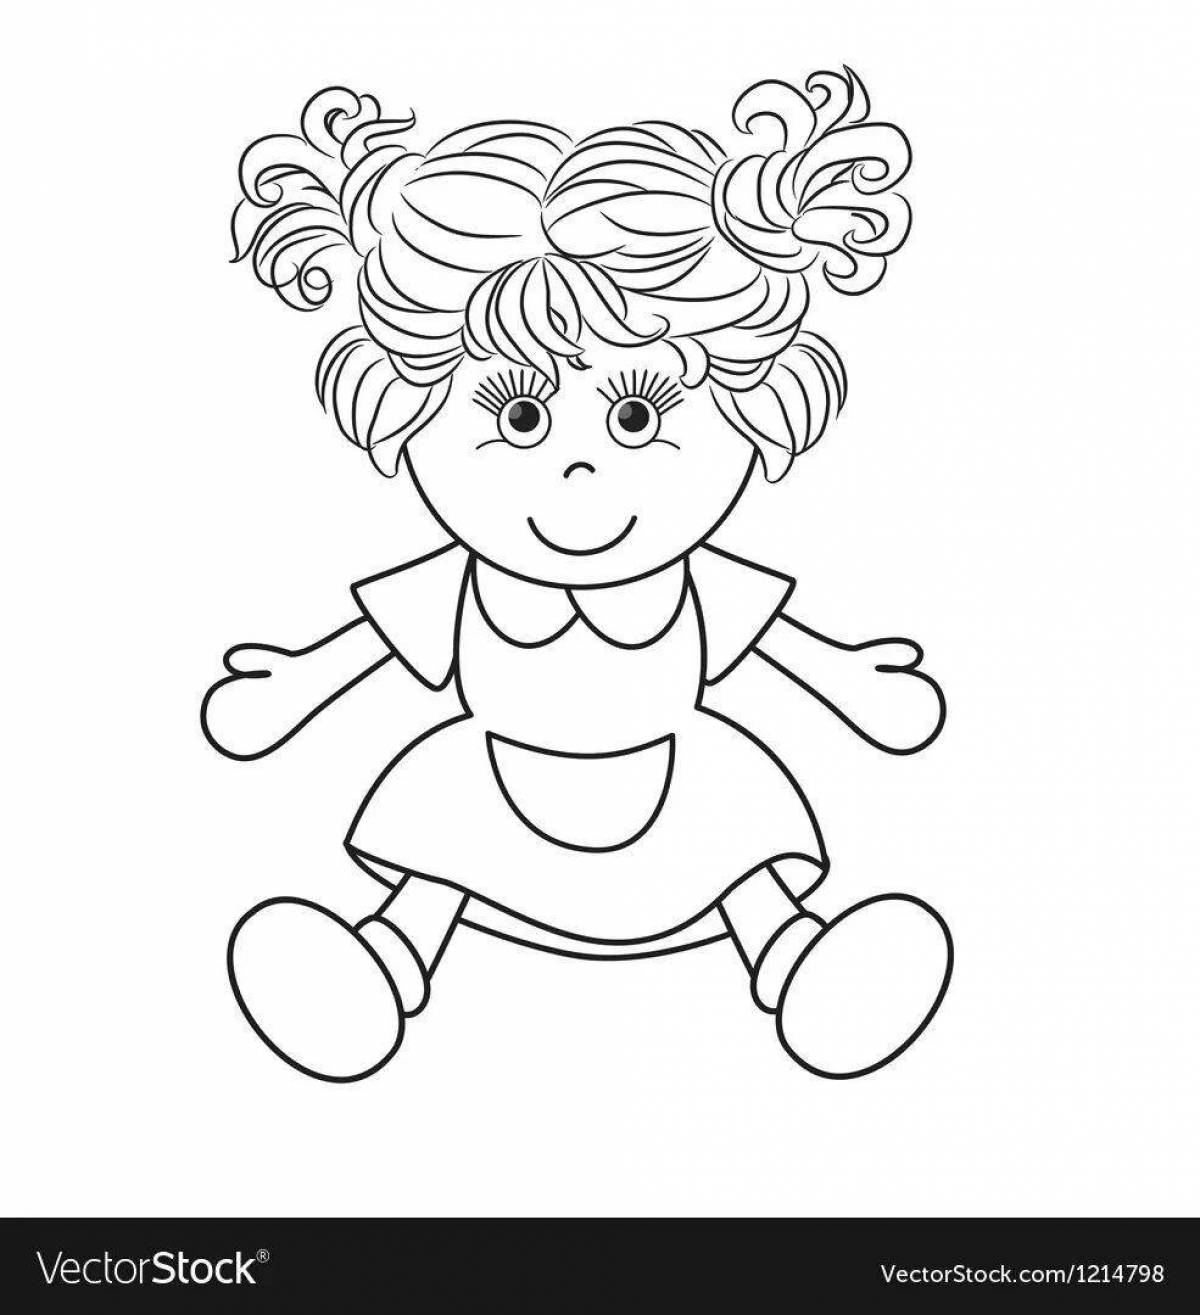 Playful coloring of baby doll in a dress